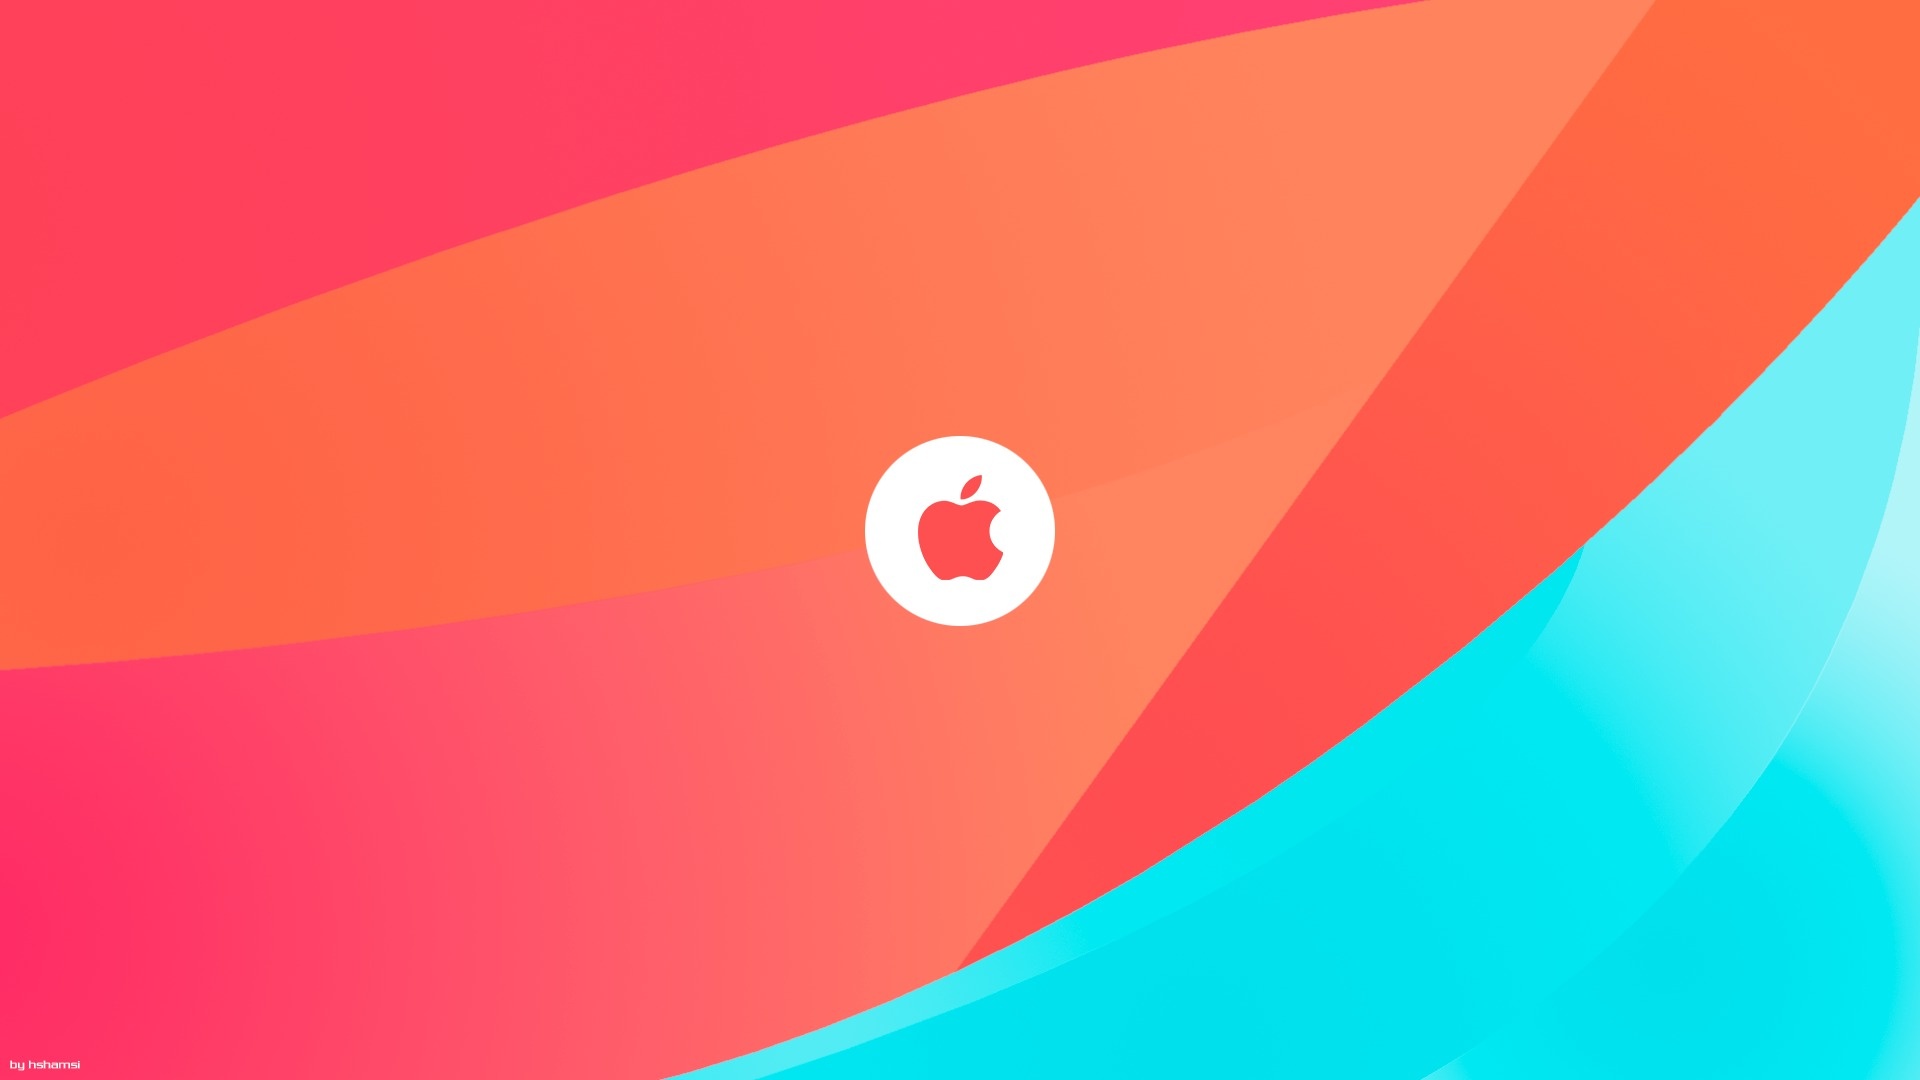 General 1920x1080 Apple Inc. colorful logo texture brand